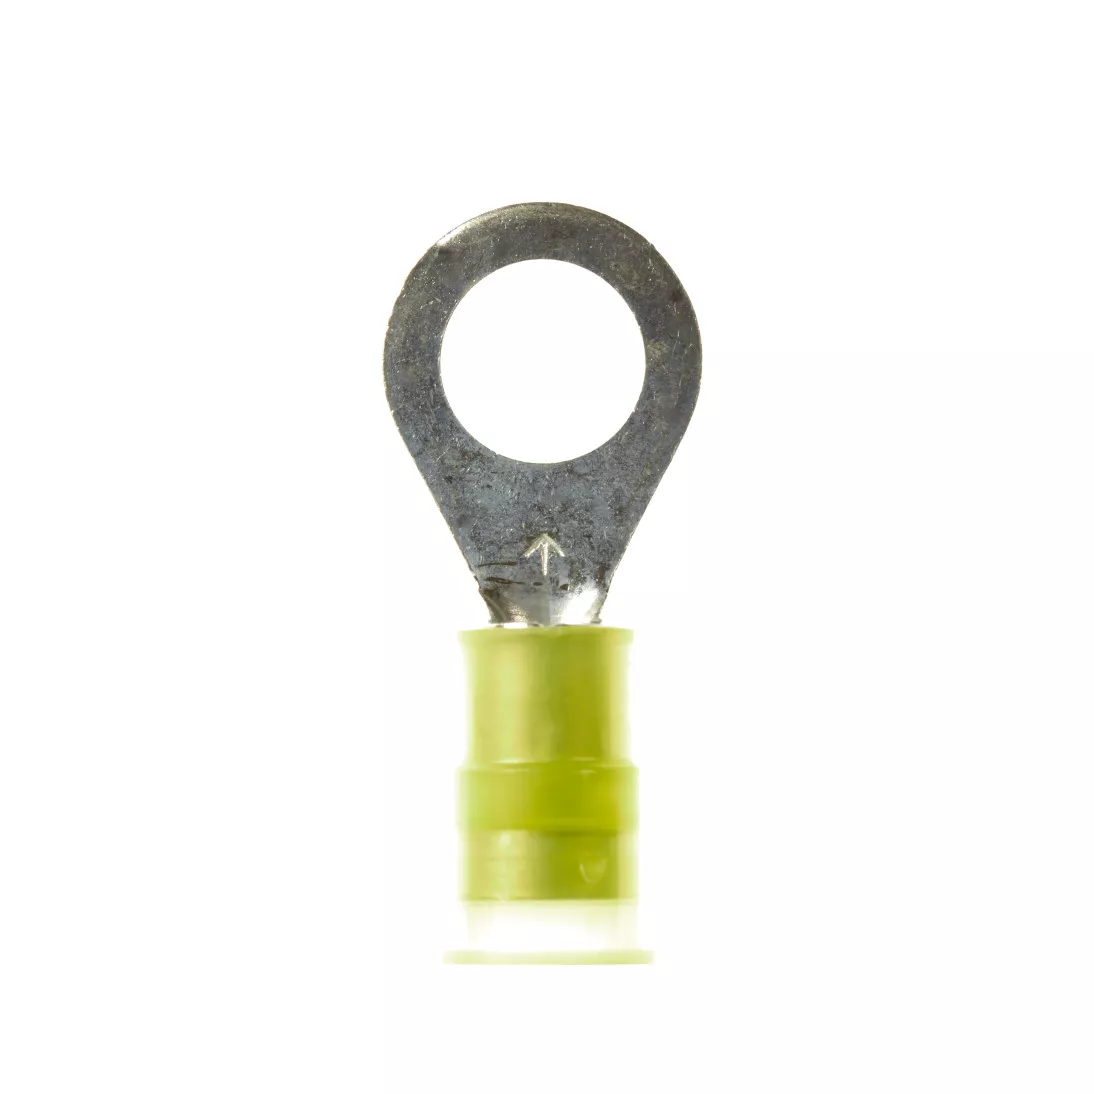 3M™ Scotchlok™ Ring Nylon Insulated, 50/bottle, MNG10-516R/SX,
standard-style ring tongue fits around the stud, 500/Case